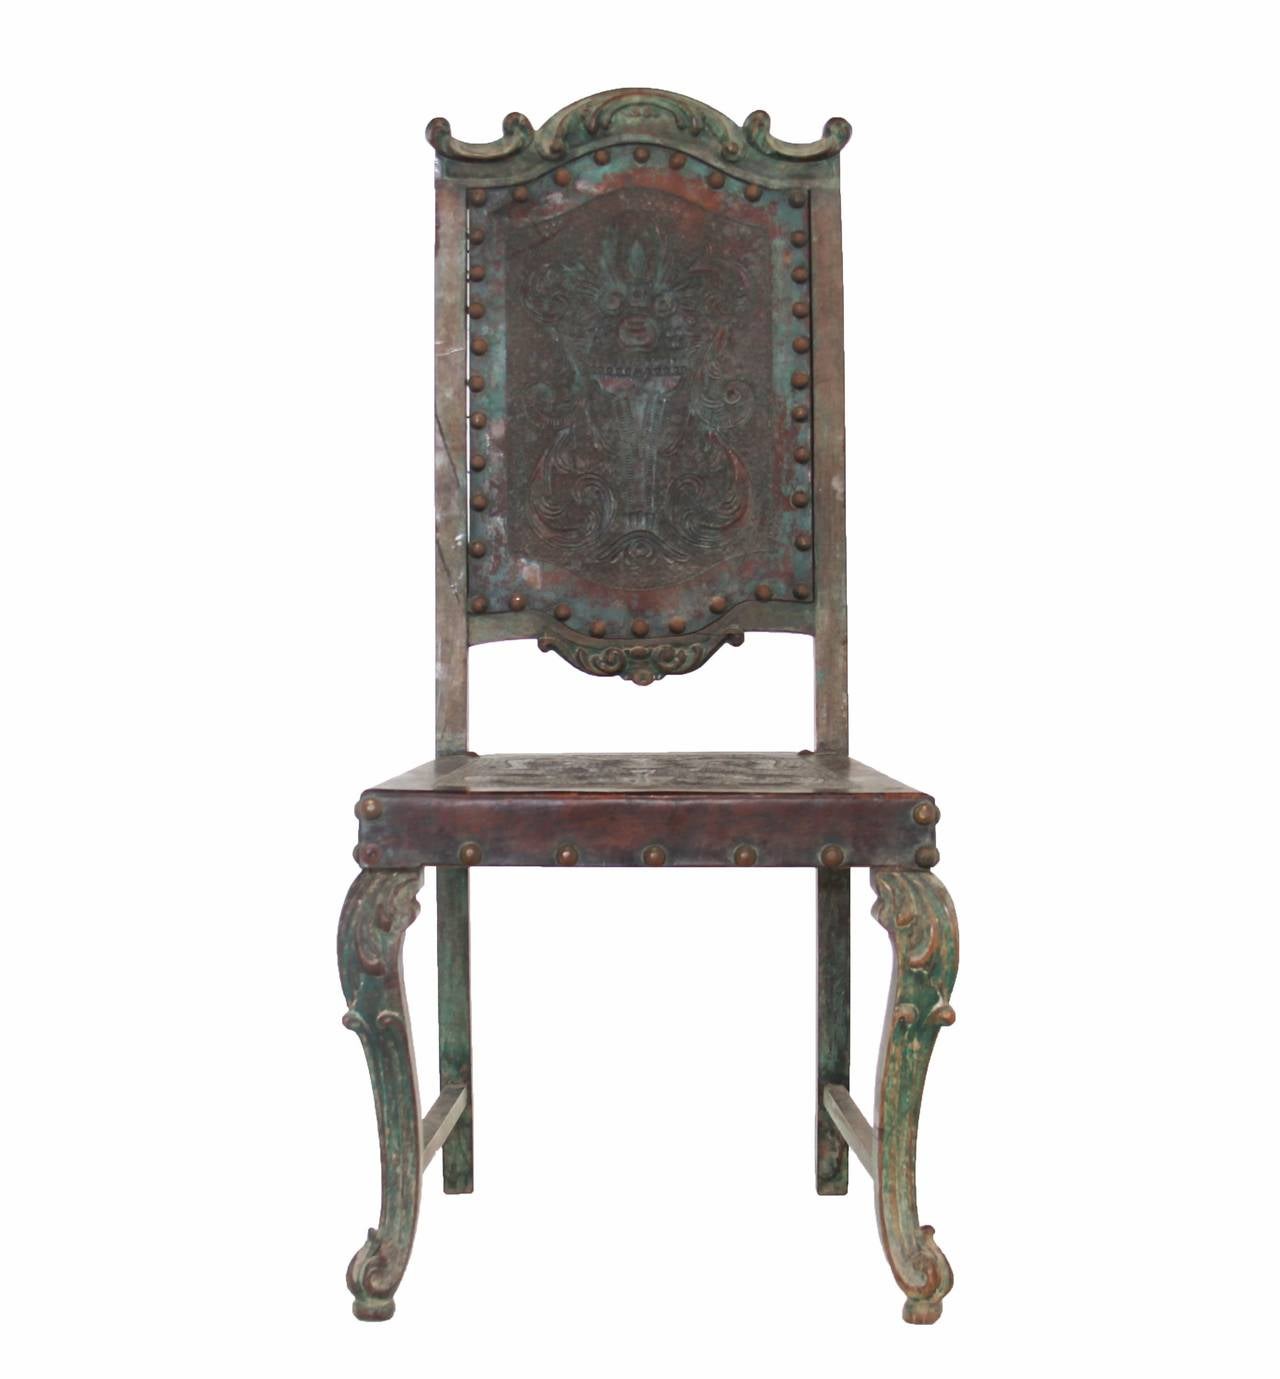 A vintage side chair by Dom Pedro with ornate frame with distressed, rustic brown and green aged finish. The back and seat are embossed original leather. There is one tear in the leather on the top back panel but it can be reinforced from the back